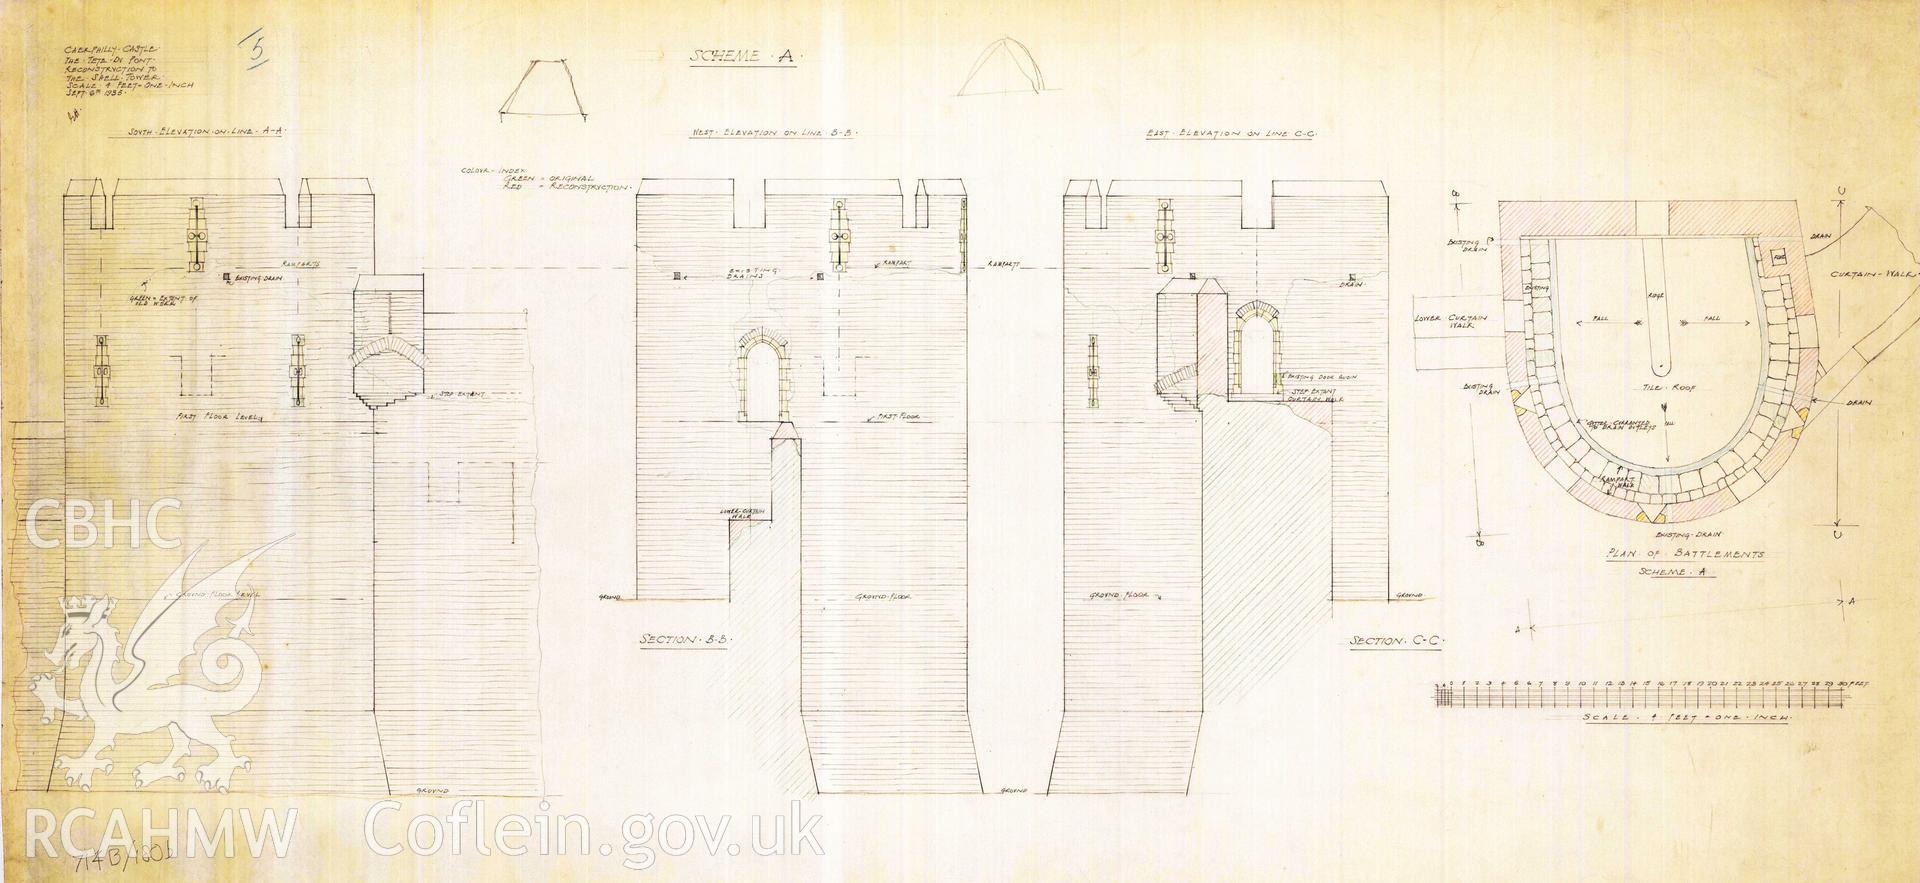 Cadw guardianship monument drawing of Caerphilly Castle. Dam S tower, elevs (iii) sch A. Cadw Ref. No:714B/180b. Scale 1:48.